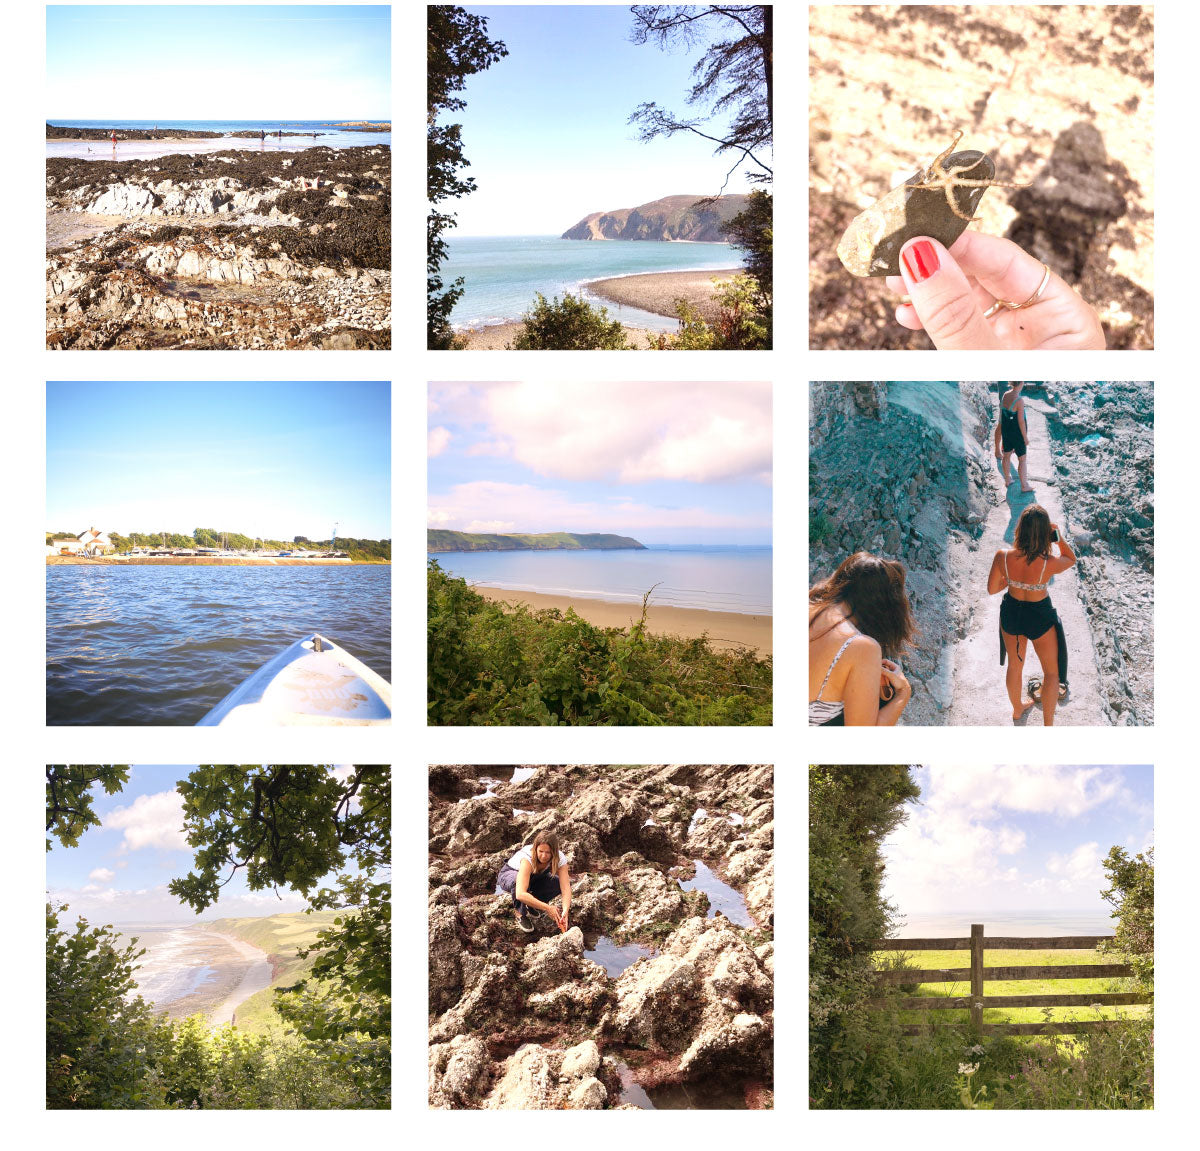 A grid of photos from the coast of North Devon - Instow, Baggy Point, Woolacombe, Morte Point, Croyde, Lee Bay